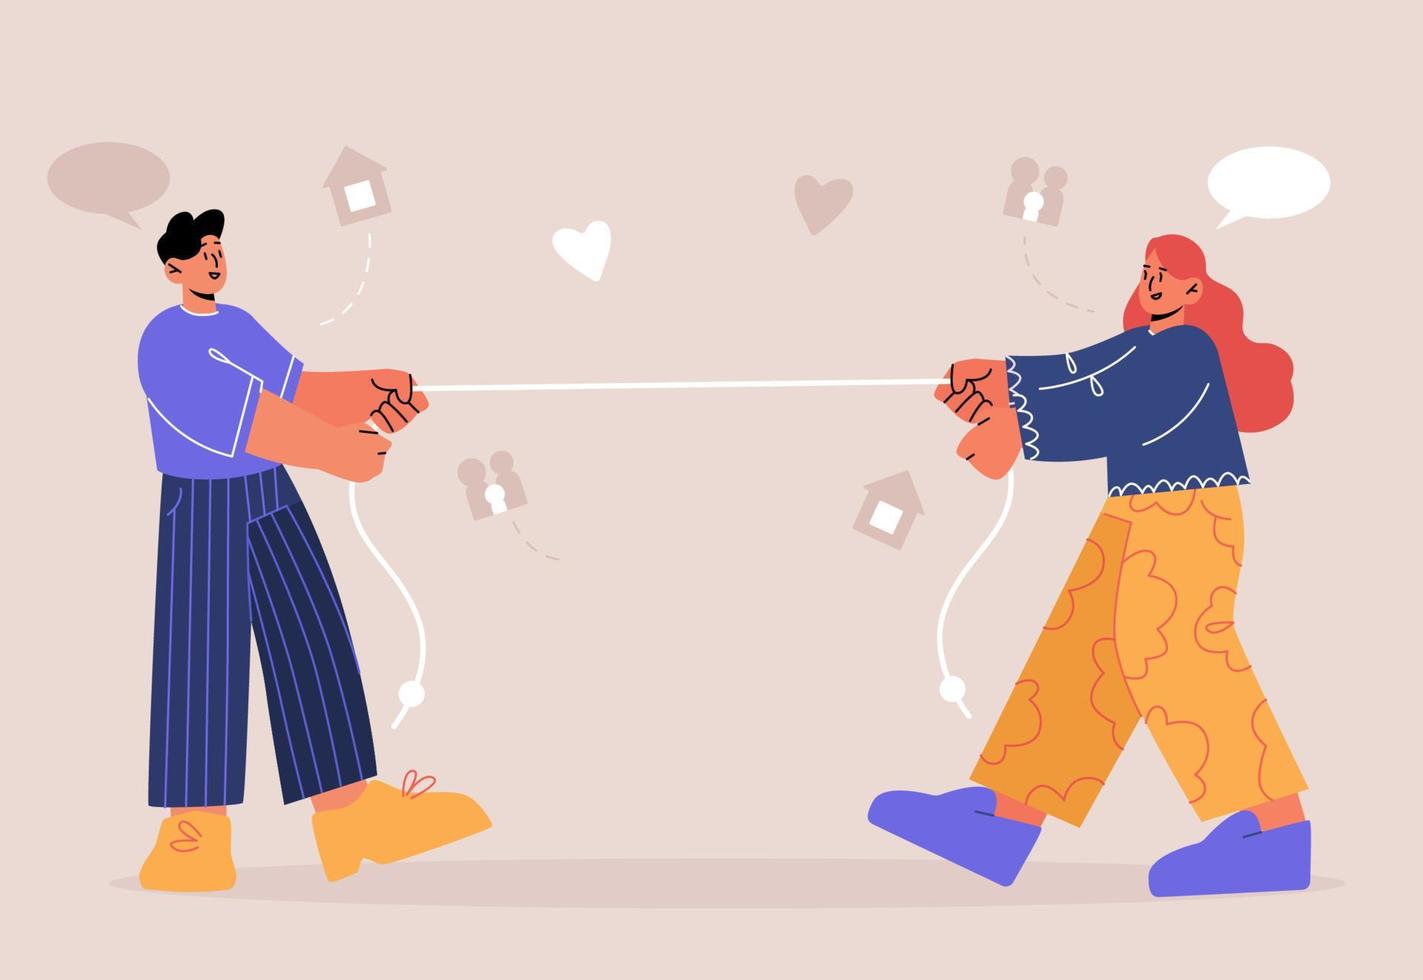 Tug of war competition between man and woman vector